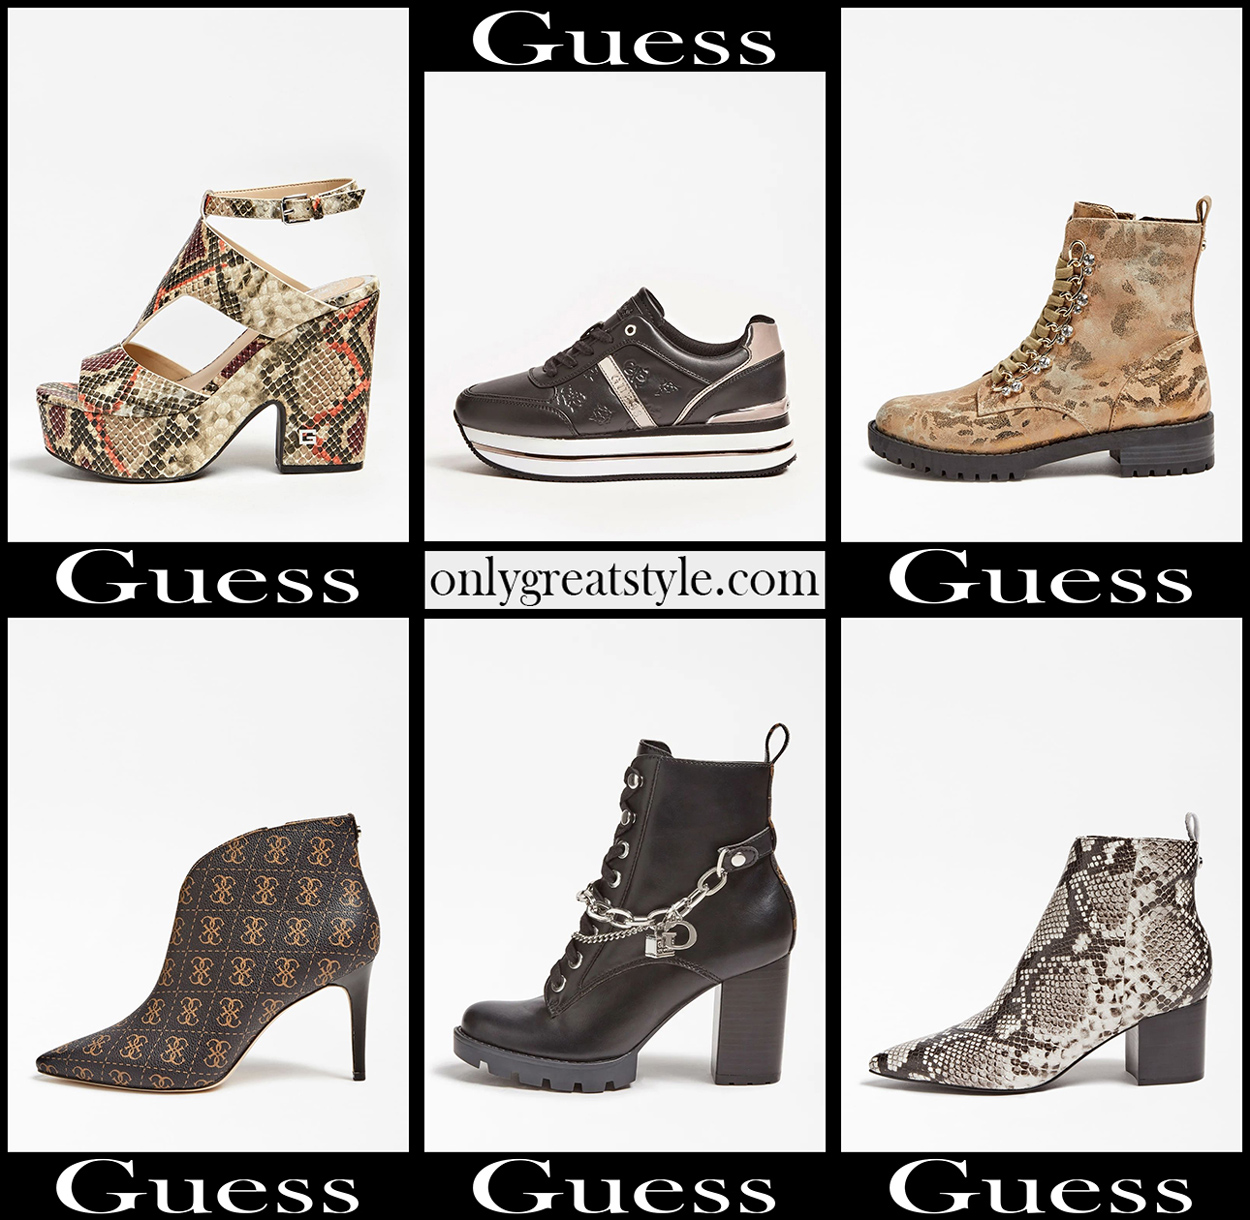 guess shoes new collection